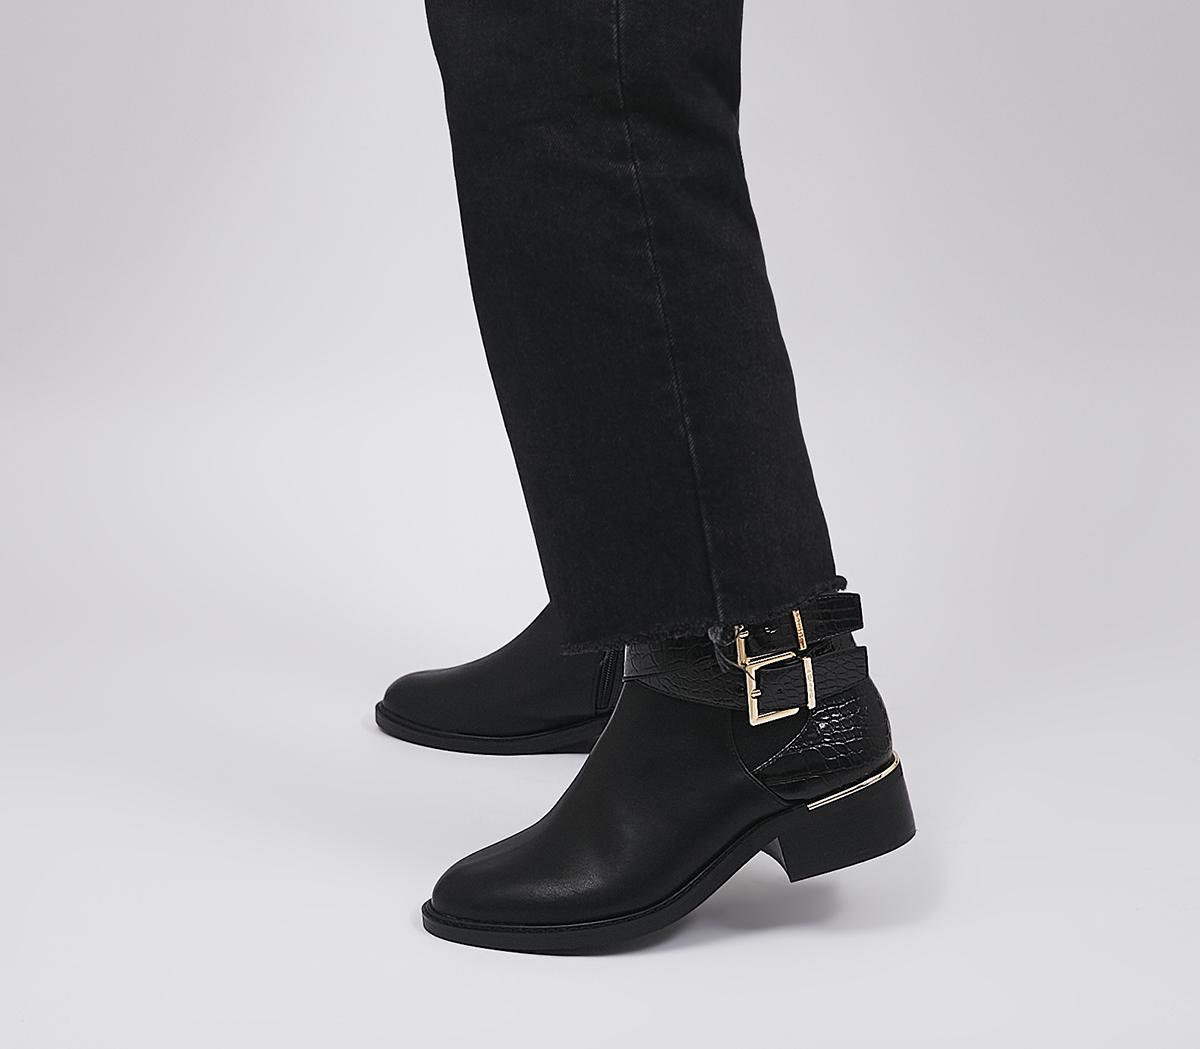 OFFICEWide Fit Ana-Maria Buckle Strap Ankle BootsBlack